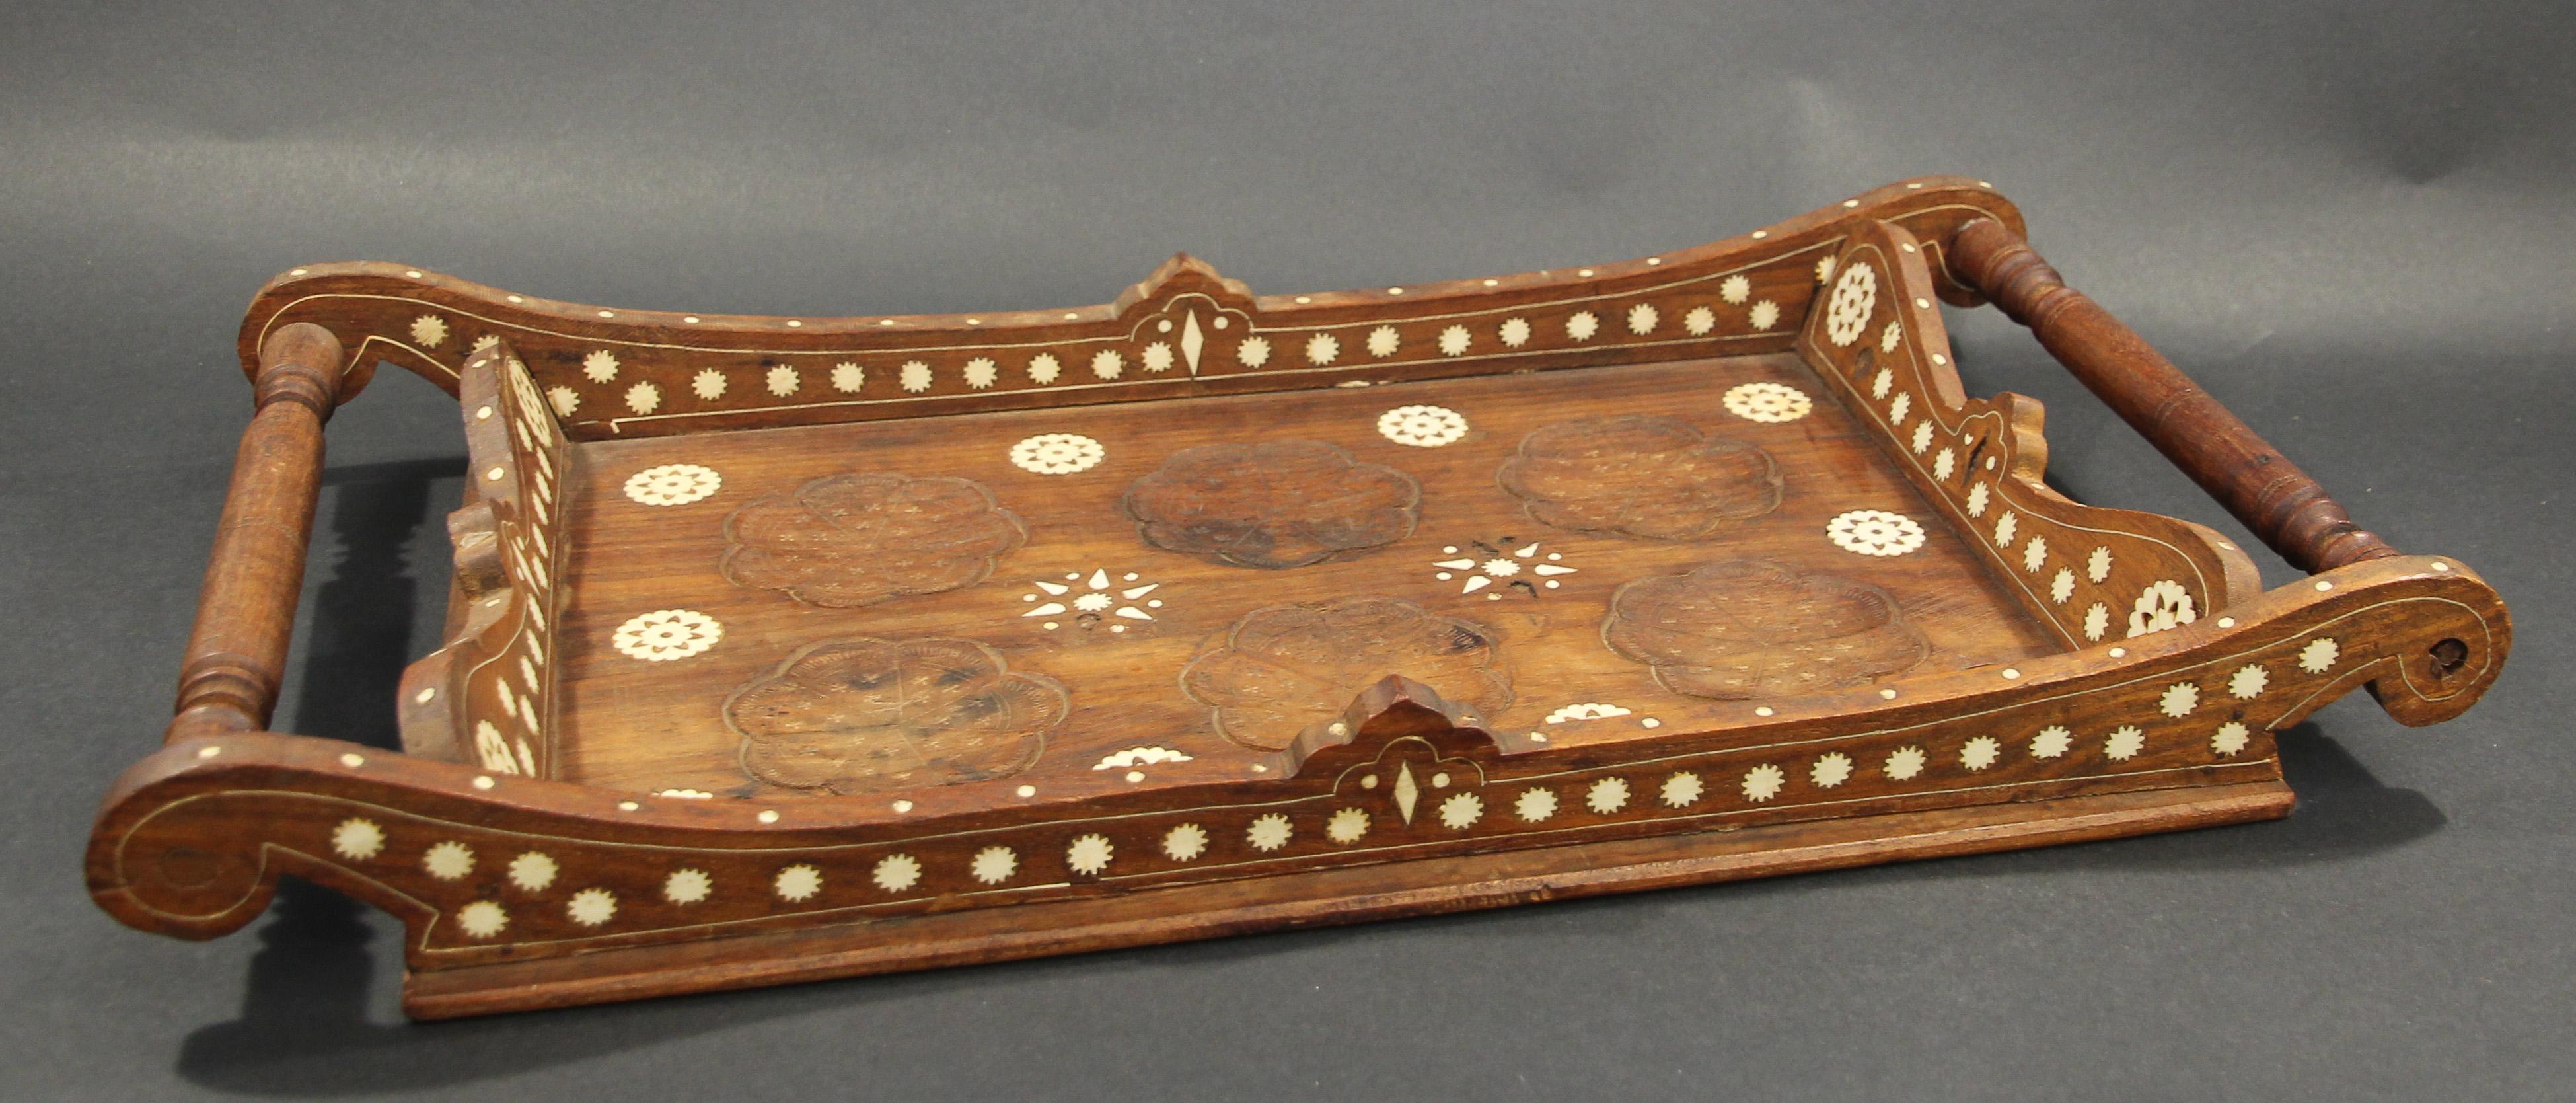 Vintage Large Teak Wood with Bone inlay Made in India 1